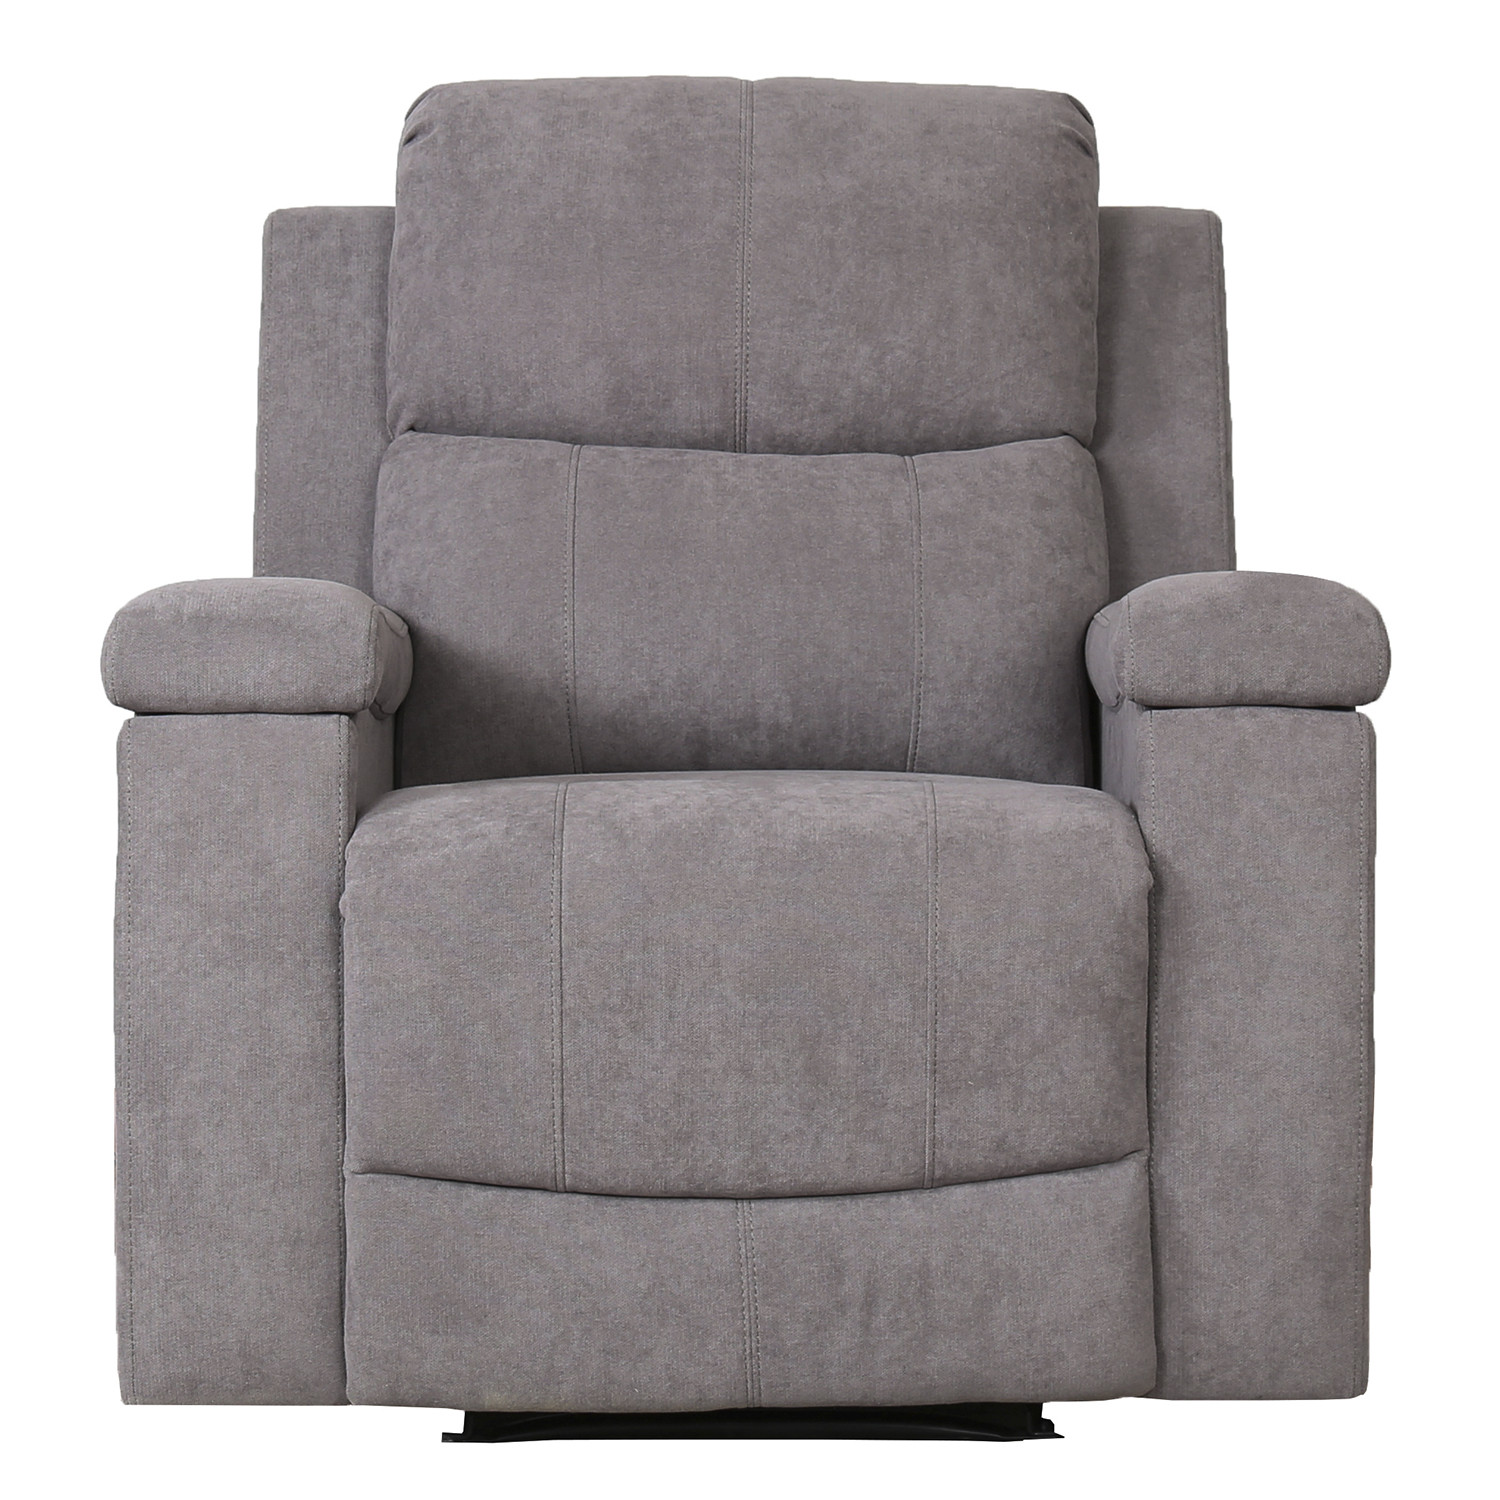 Ledbury Grey Fabric Manual Recliner Chair with Footrest Image 3